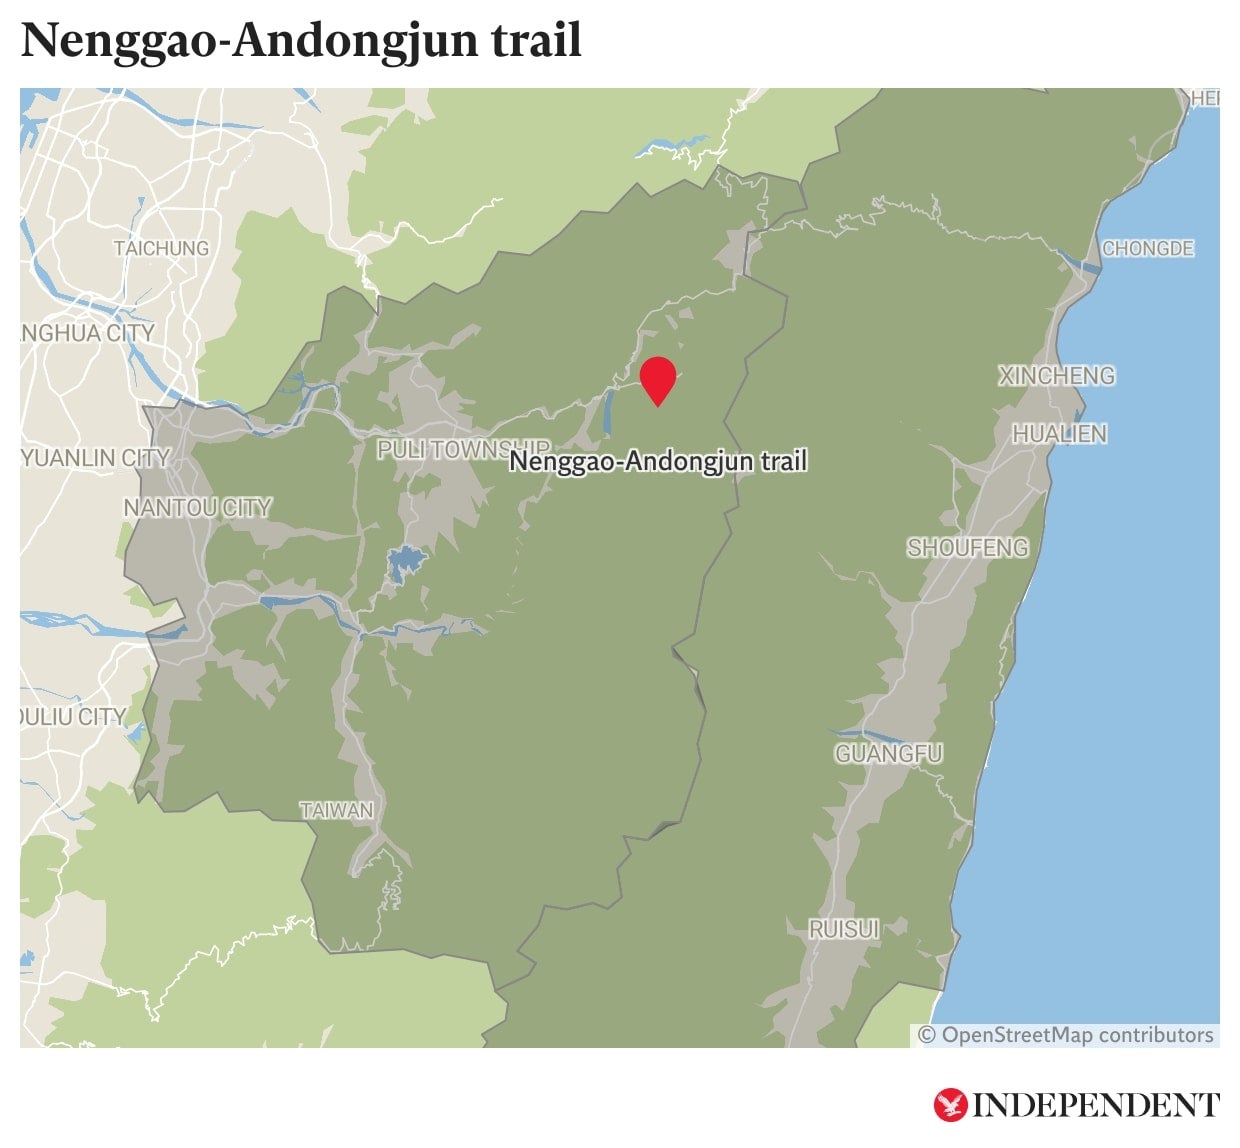 <p>Missing American hiker found dead on the Nenggao-Andongjun trail in central Taiwan</p>